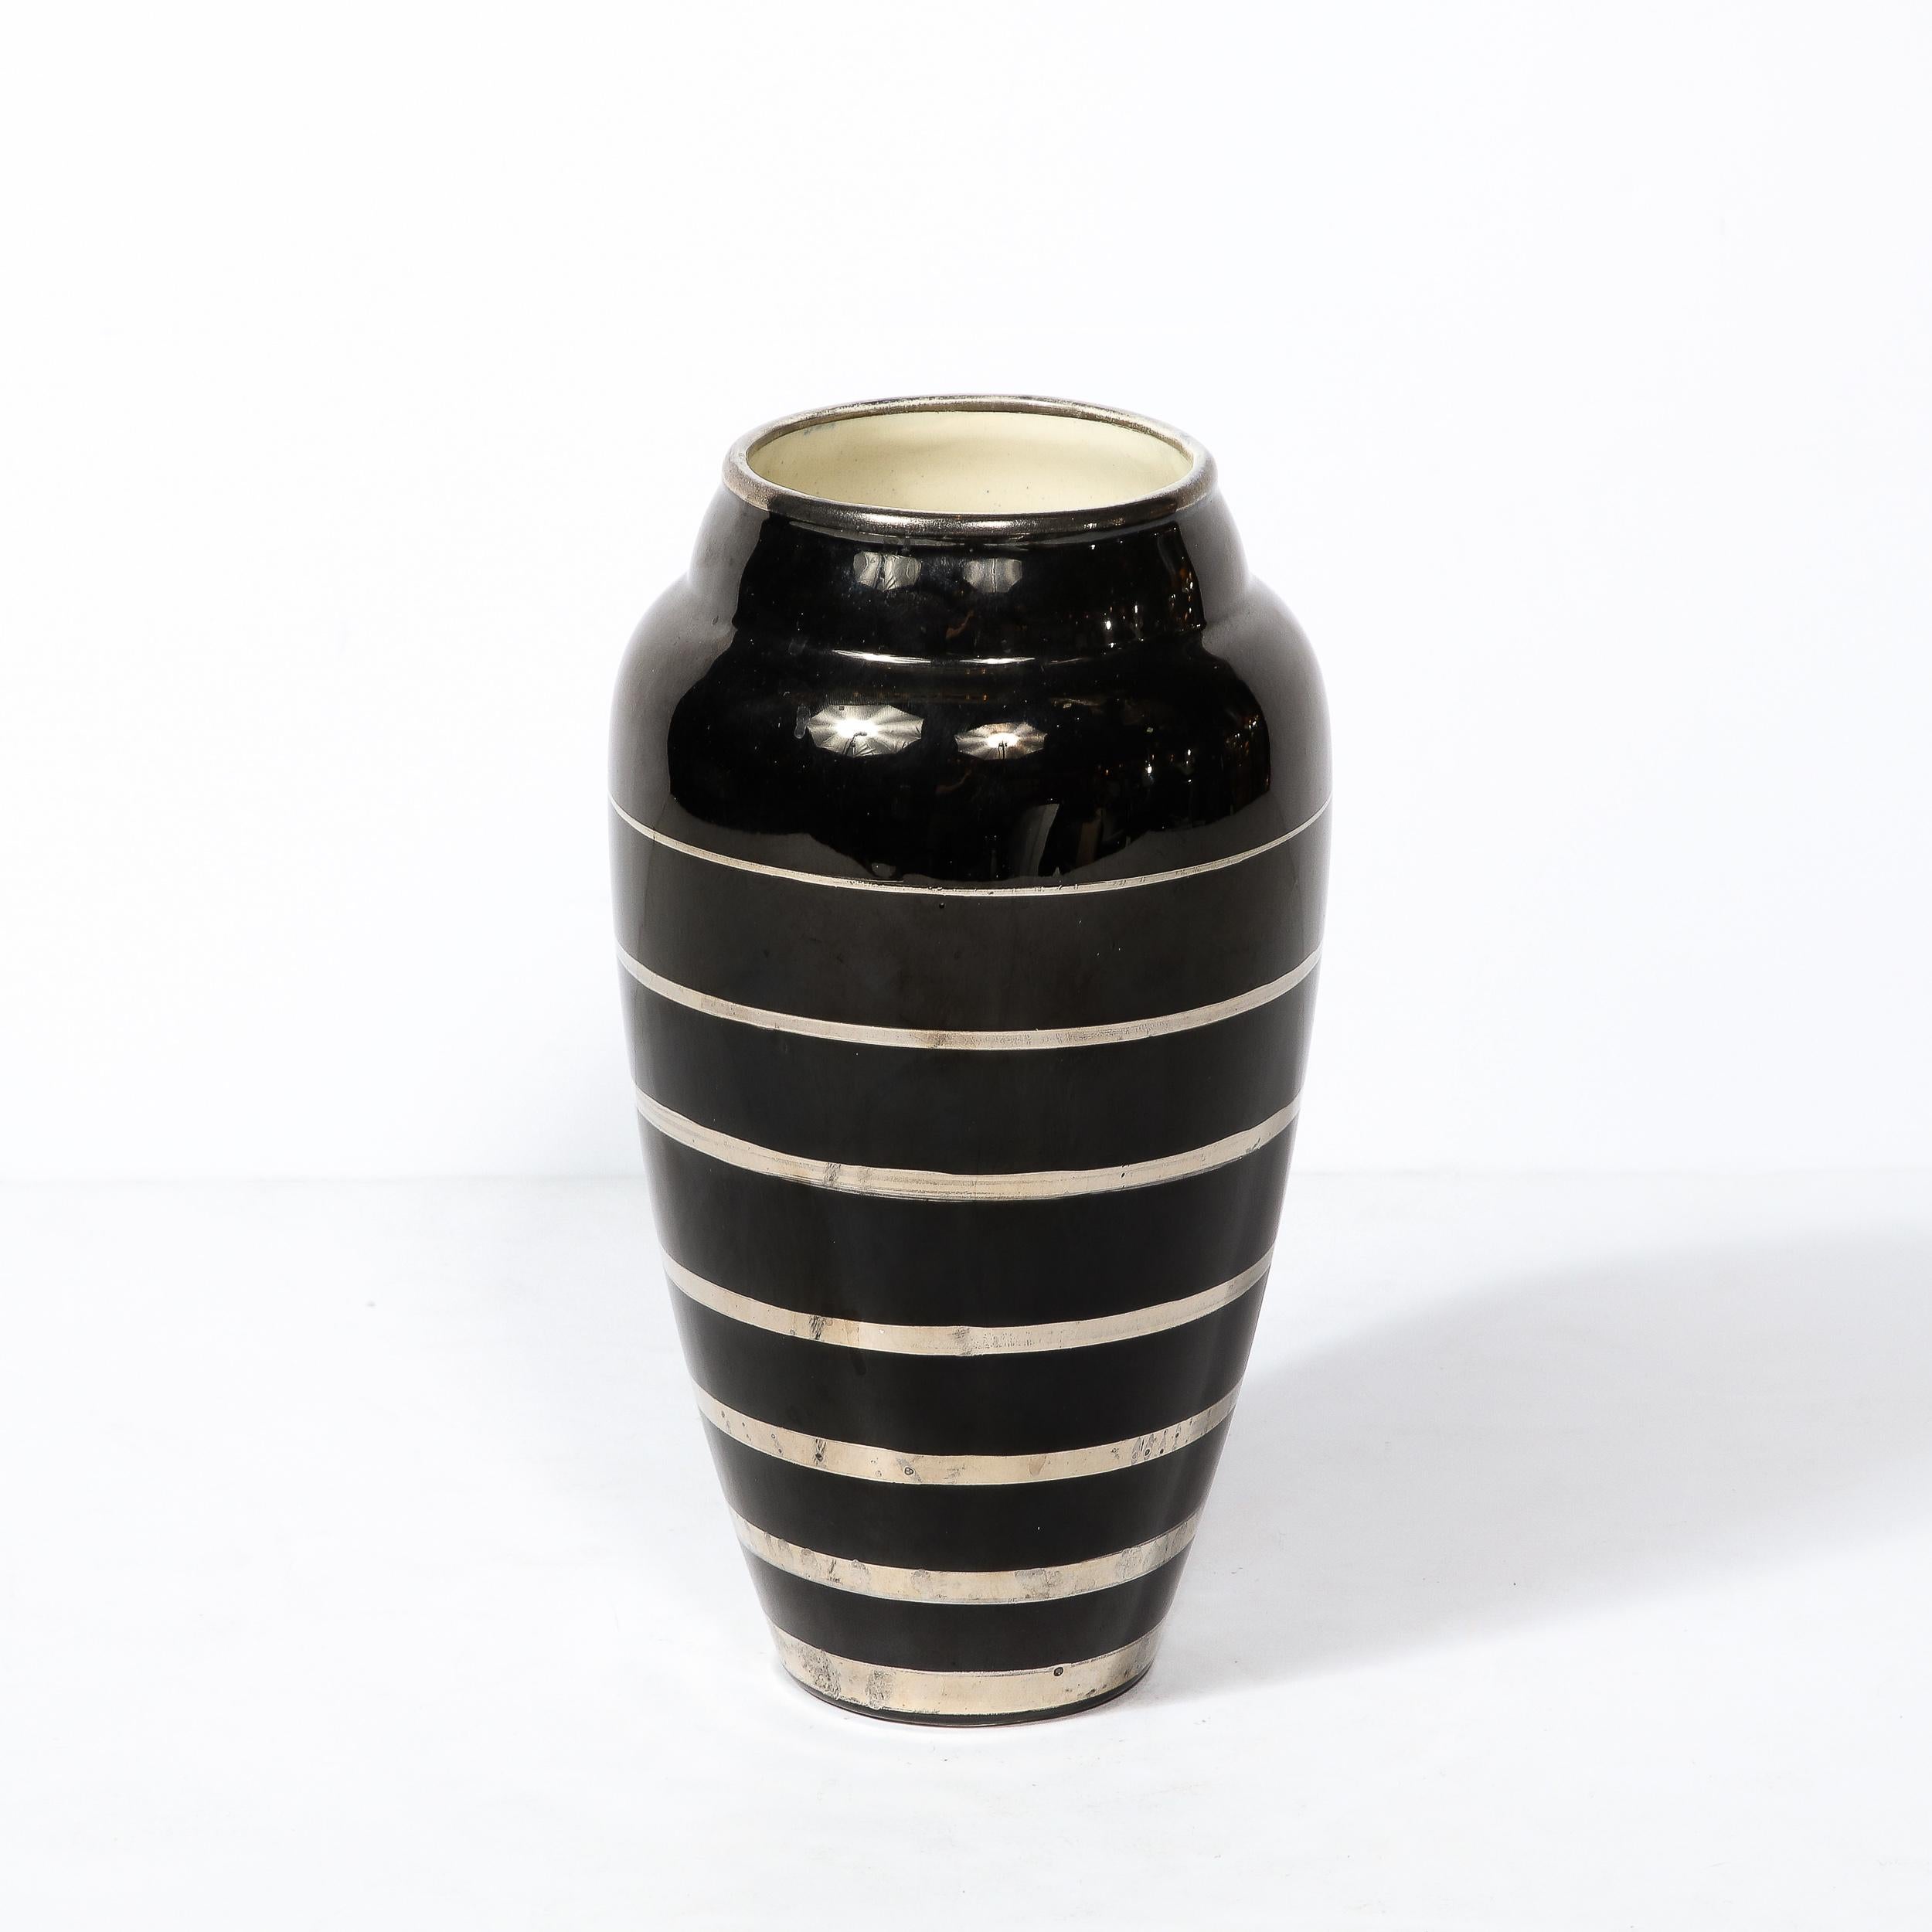 This Art Deco vase is an exceptional example of this iconic style, with a timeless form and beautiful glazed surface and originates from the Belgium Circa 1935. Glazed in a beautiful ivory black with horizontal banded detailing in a reflective